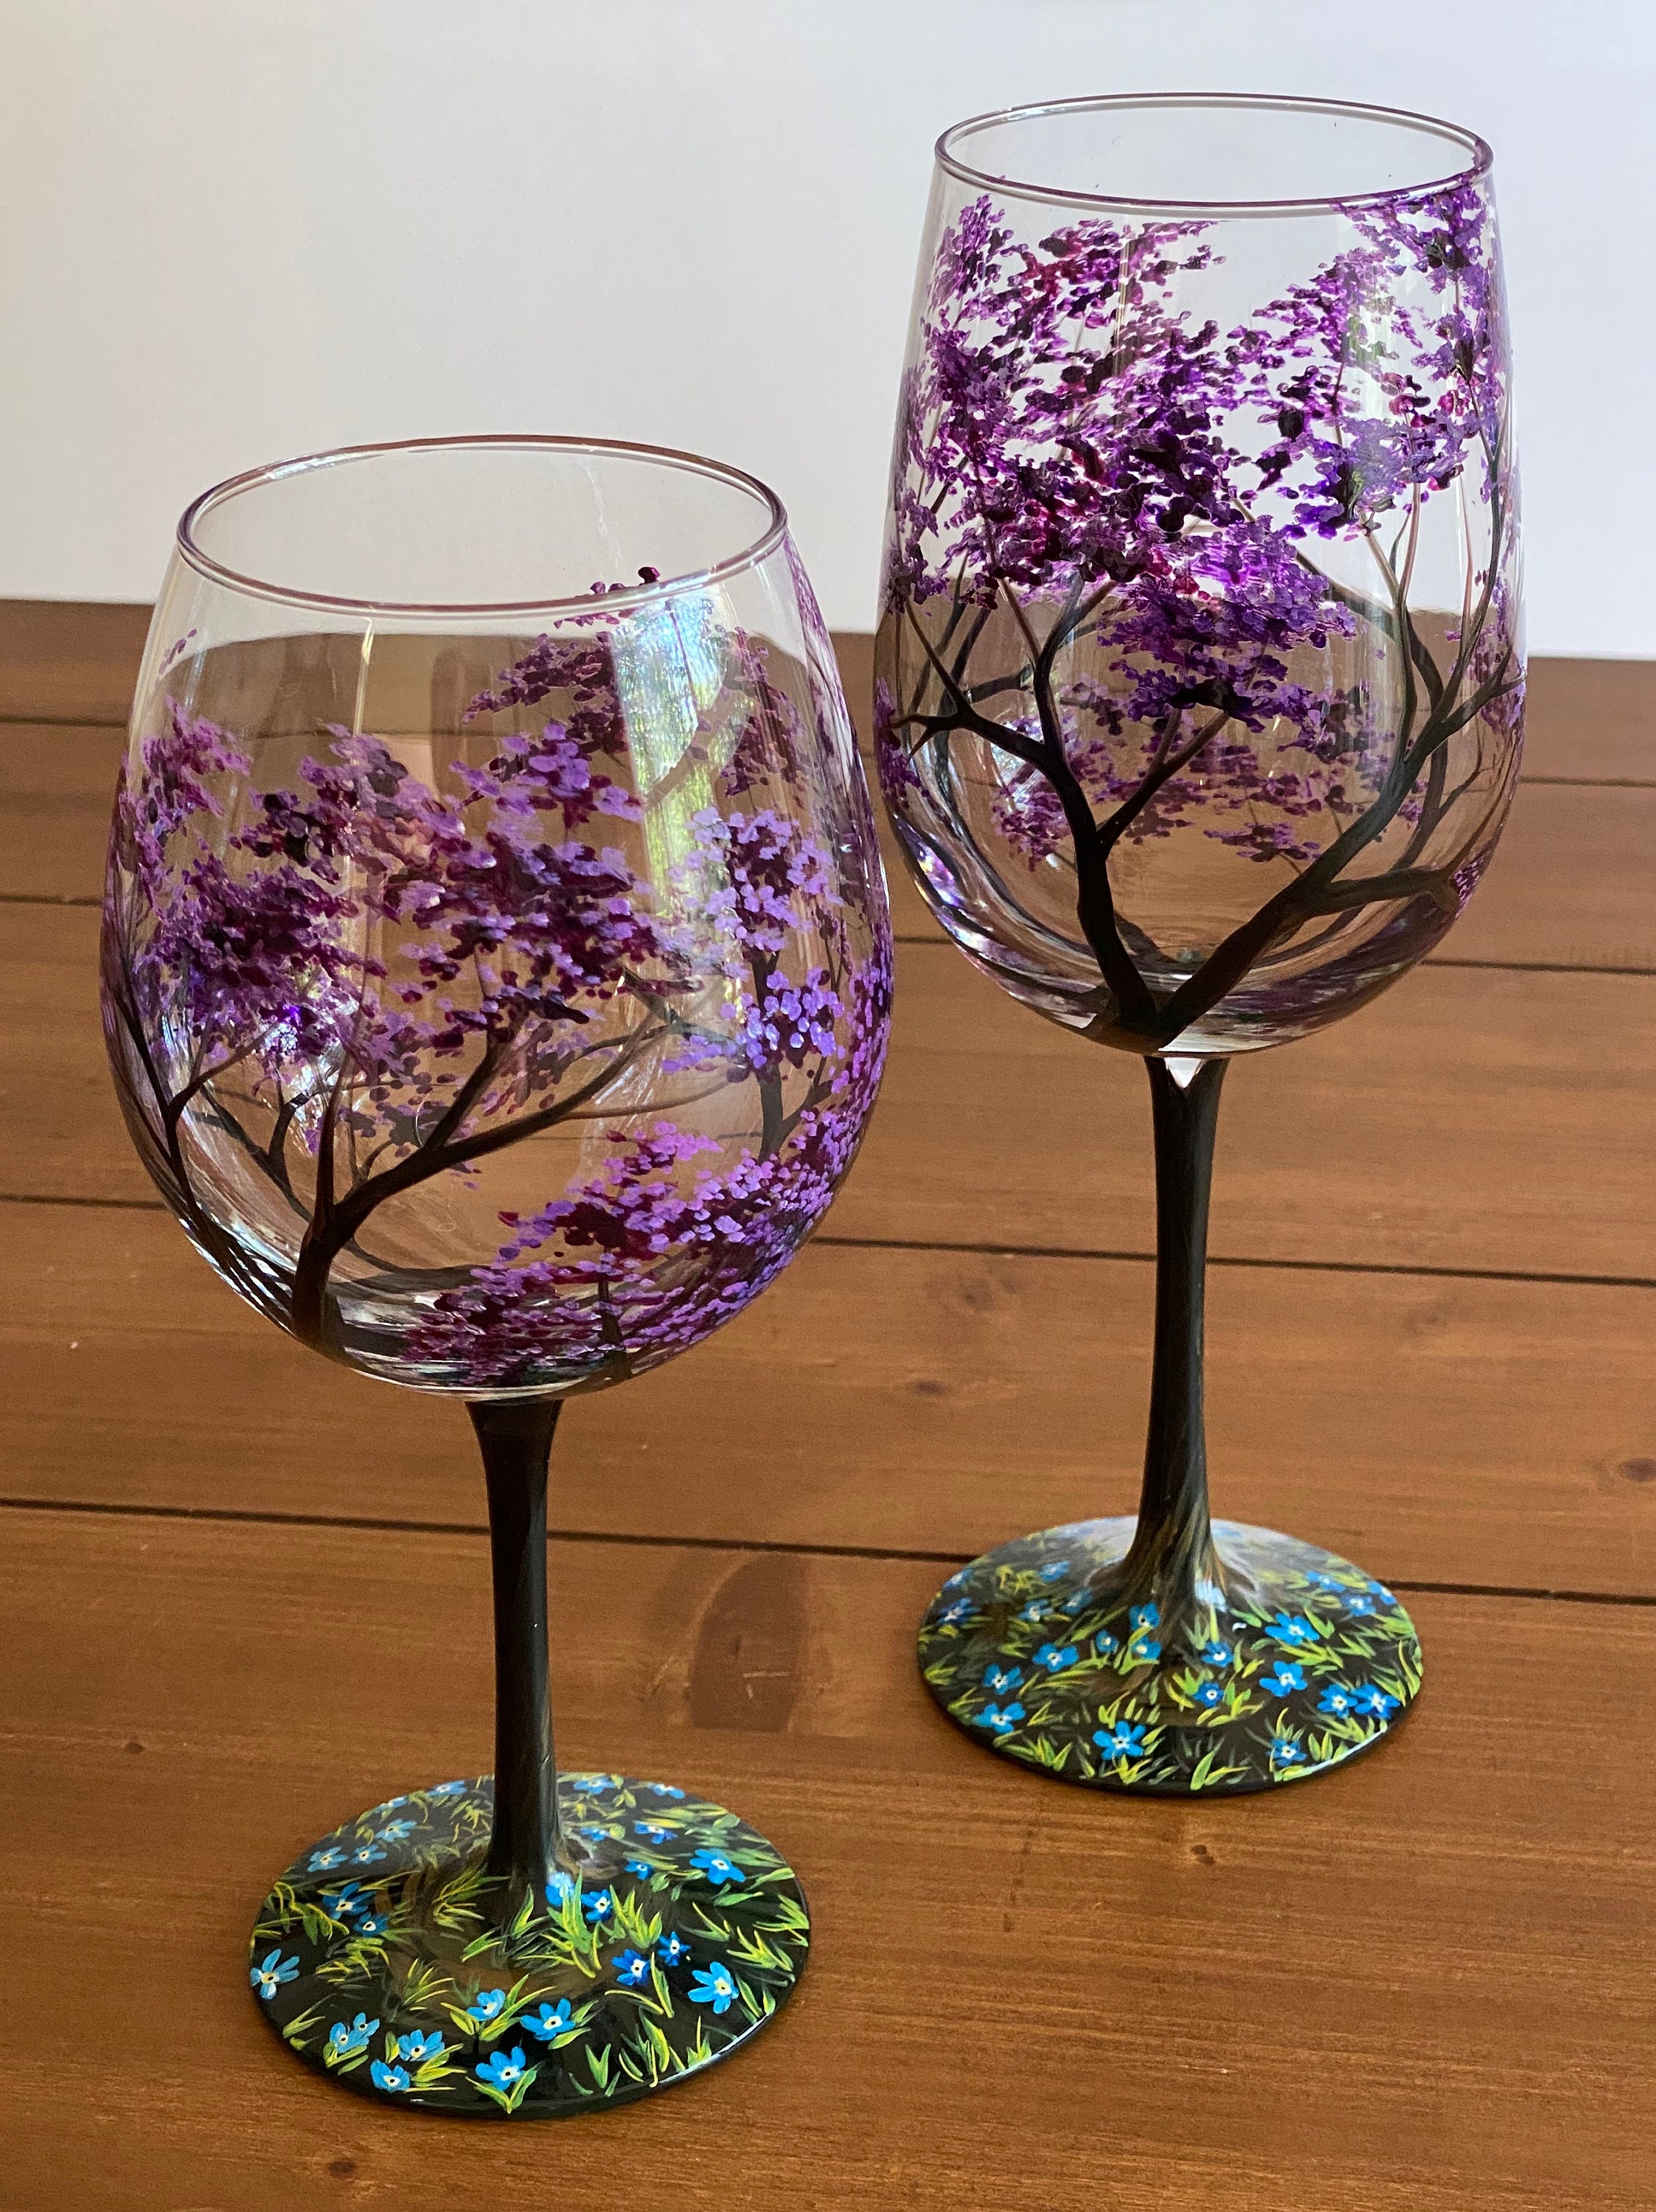 ART & ARTIFACT Four Seasons Tree Wine Glasses Set of 4 Unique Hand Painted  Wine Glasses with Stem, 10 Inch, 22 Ounce 